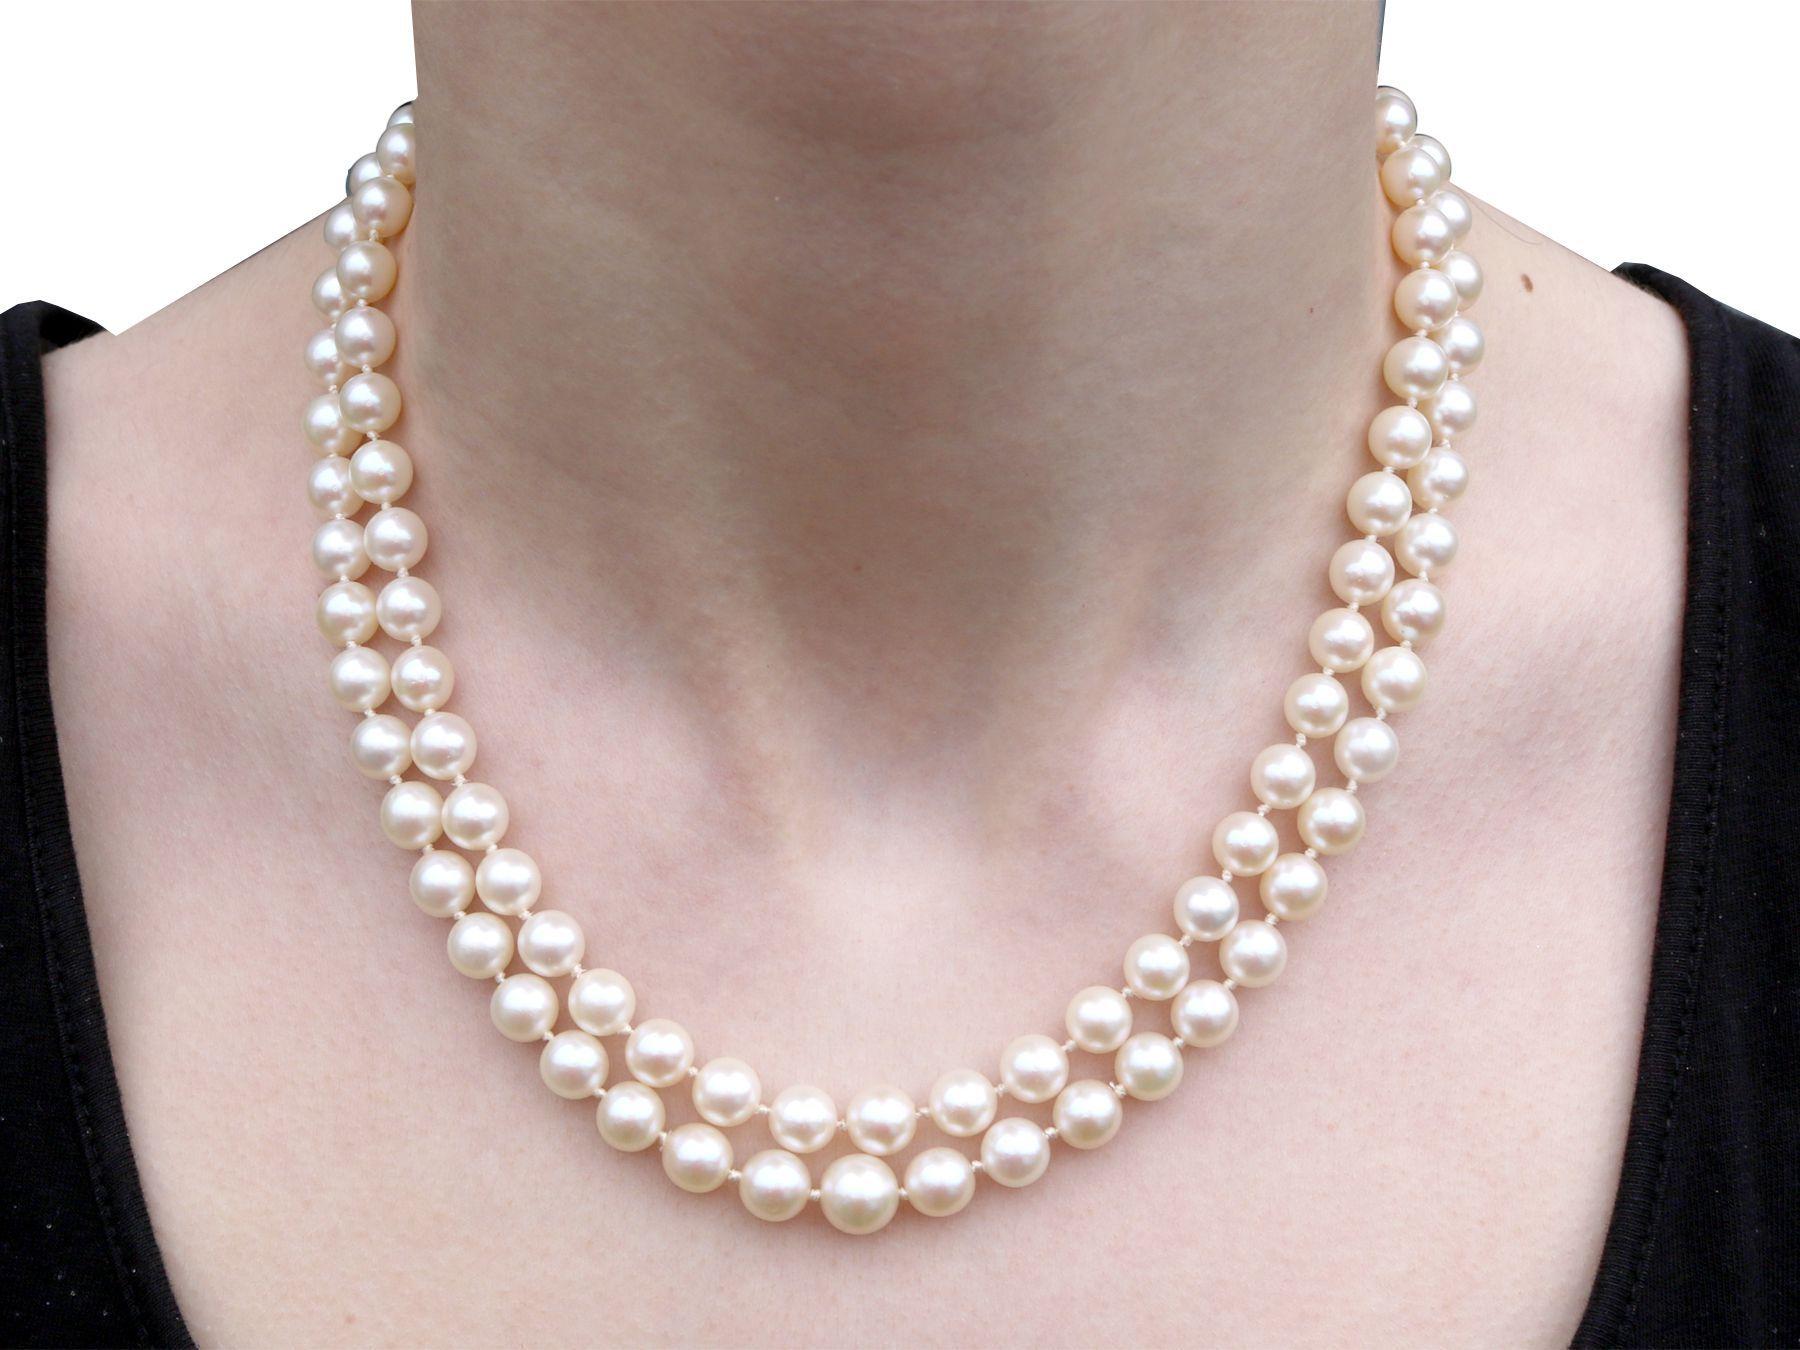 Double Strand Pearl Necklace with 14k White Gold and Diamond Clasp 2